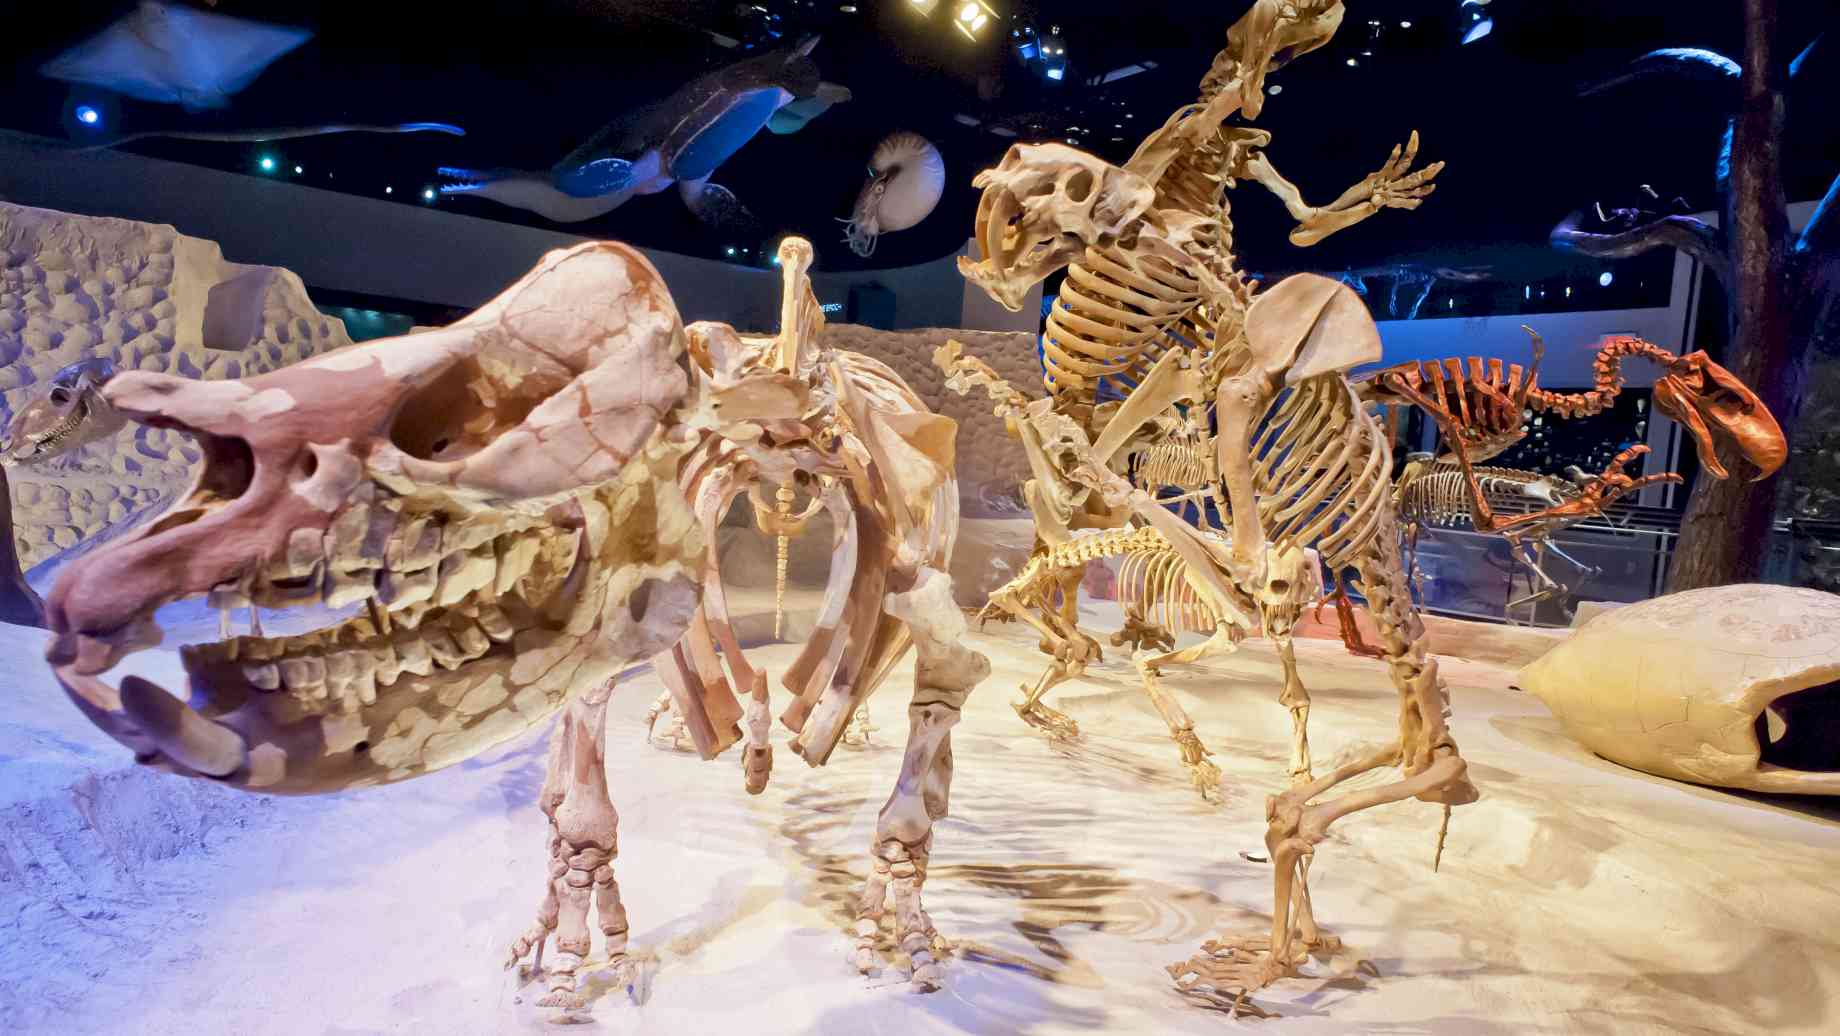 Fossils diorama. Photo credit: The Florida Museum. [Alt text: Diorama of three mammal skeletons, posed as if they are walking and rearing back.]